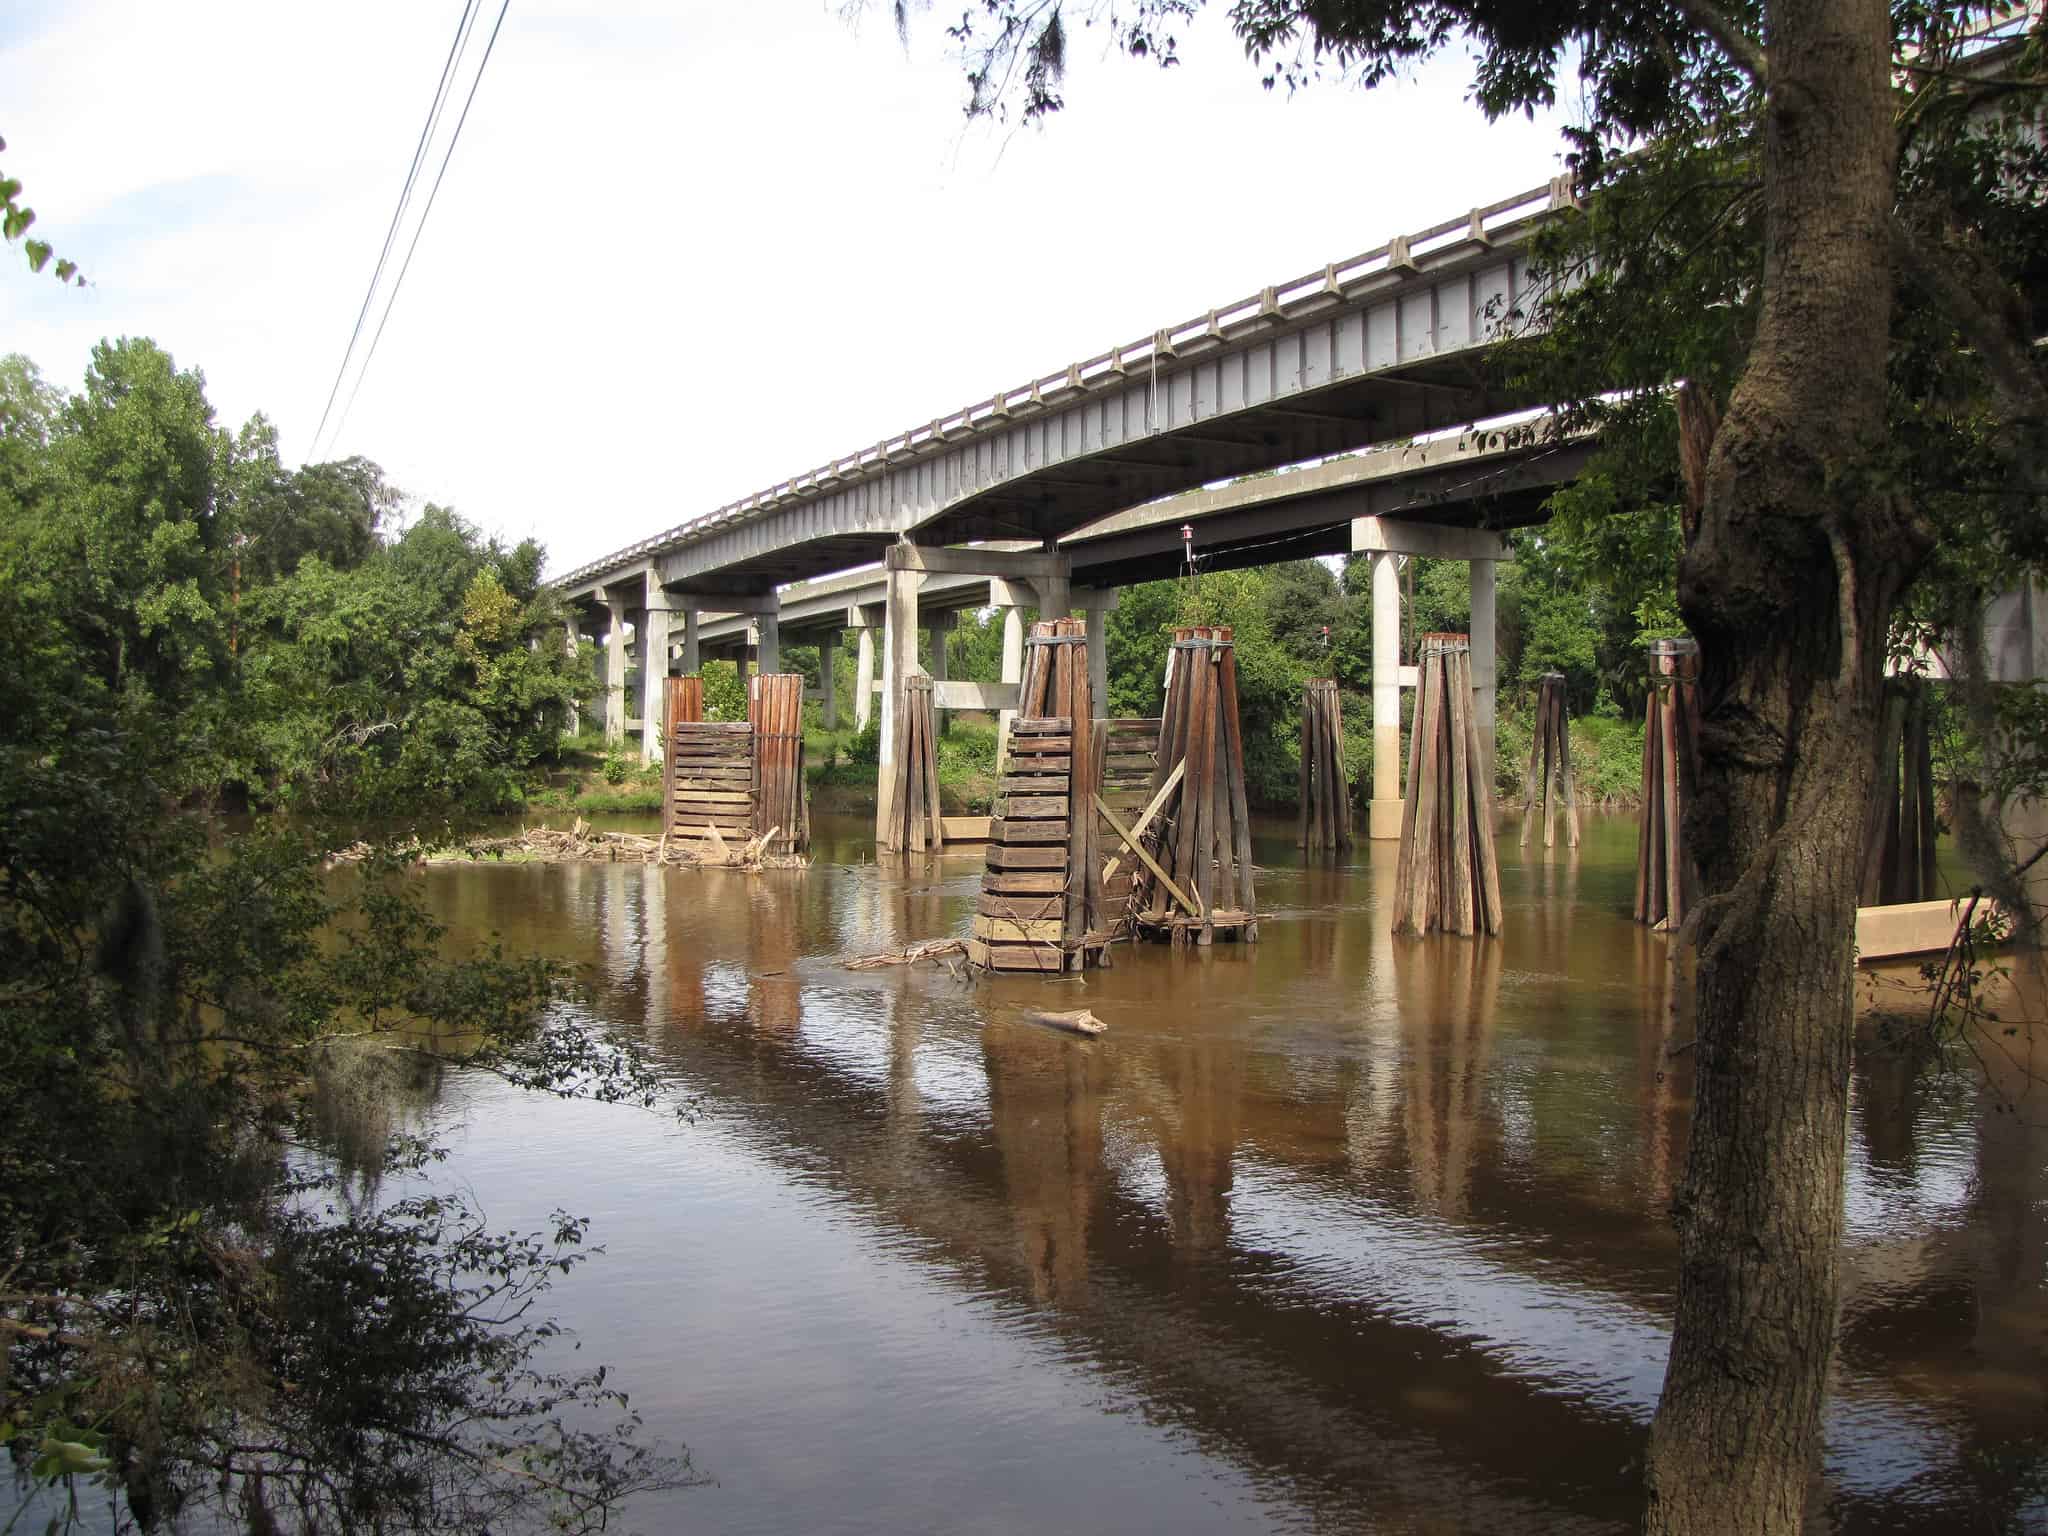 shows a bridge over the Cape Fear River, photo taken at the level of the water. GenX has been contaminating the river for years, it's been revealed.